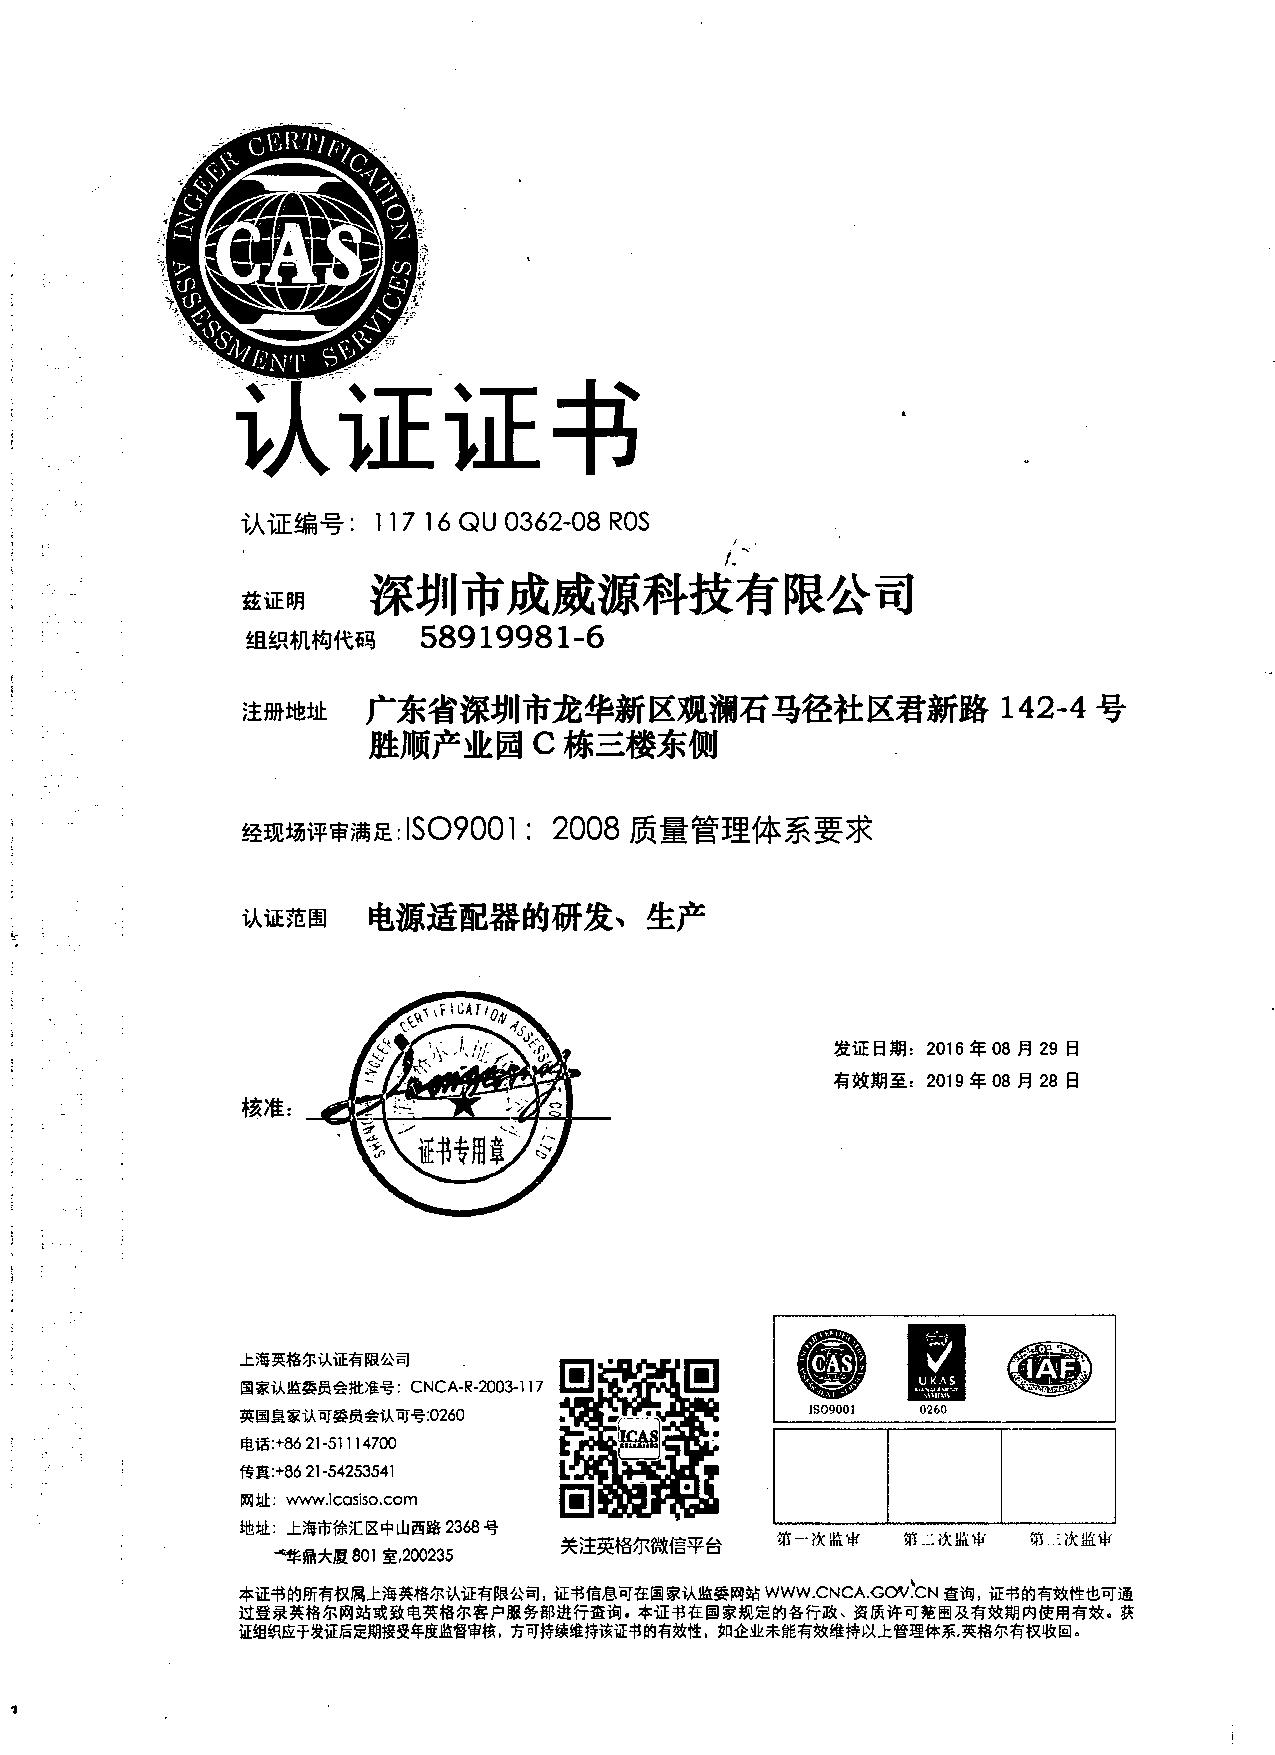 Cenwell passed ISO9001:2008 certification